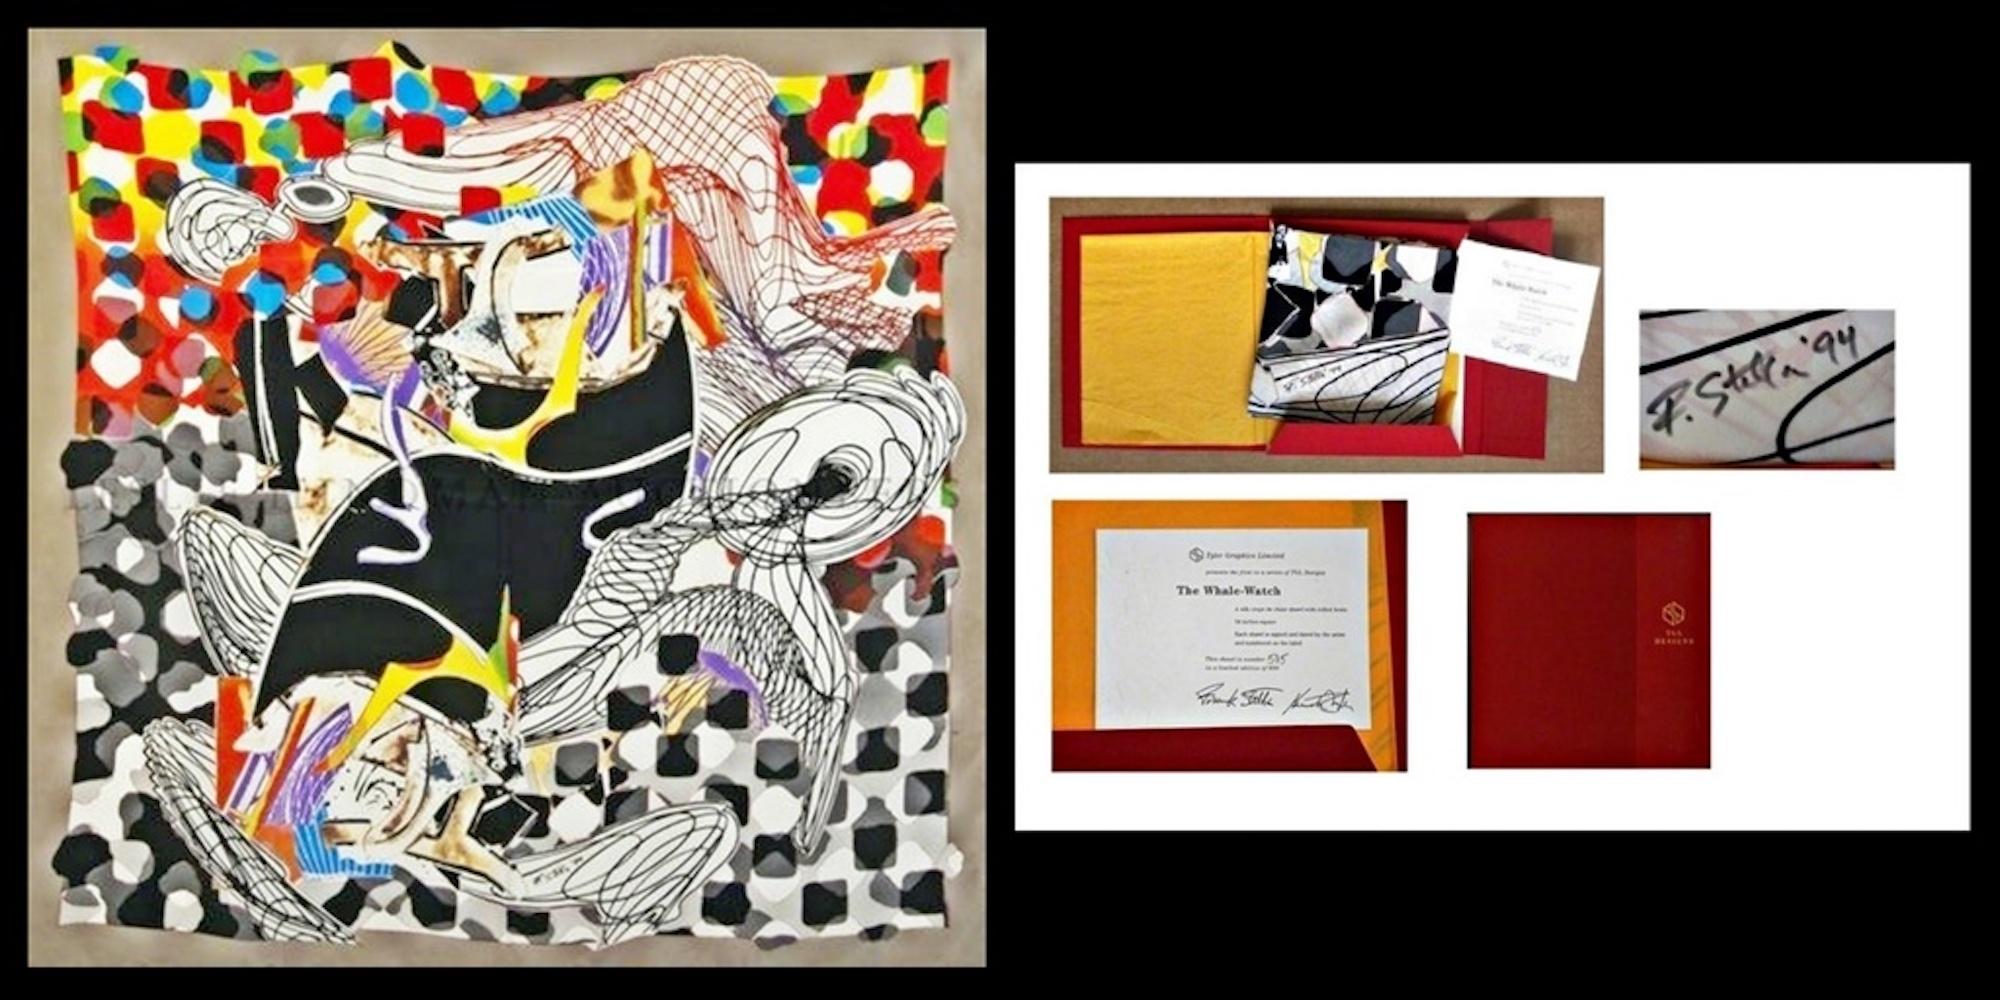 The Whale Watch Shawl (signed in indelible black marker) with Frank Stella COA 1